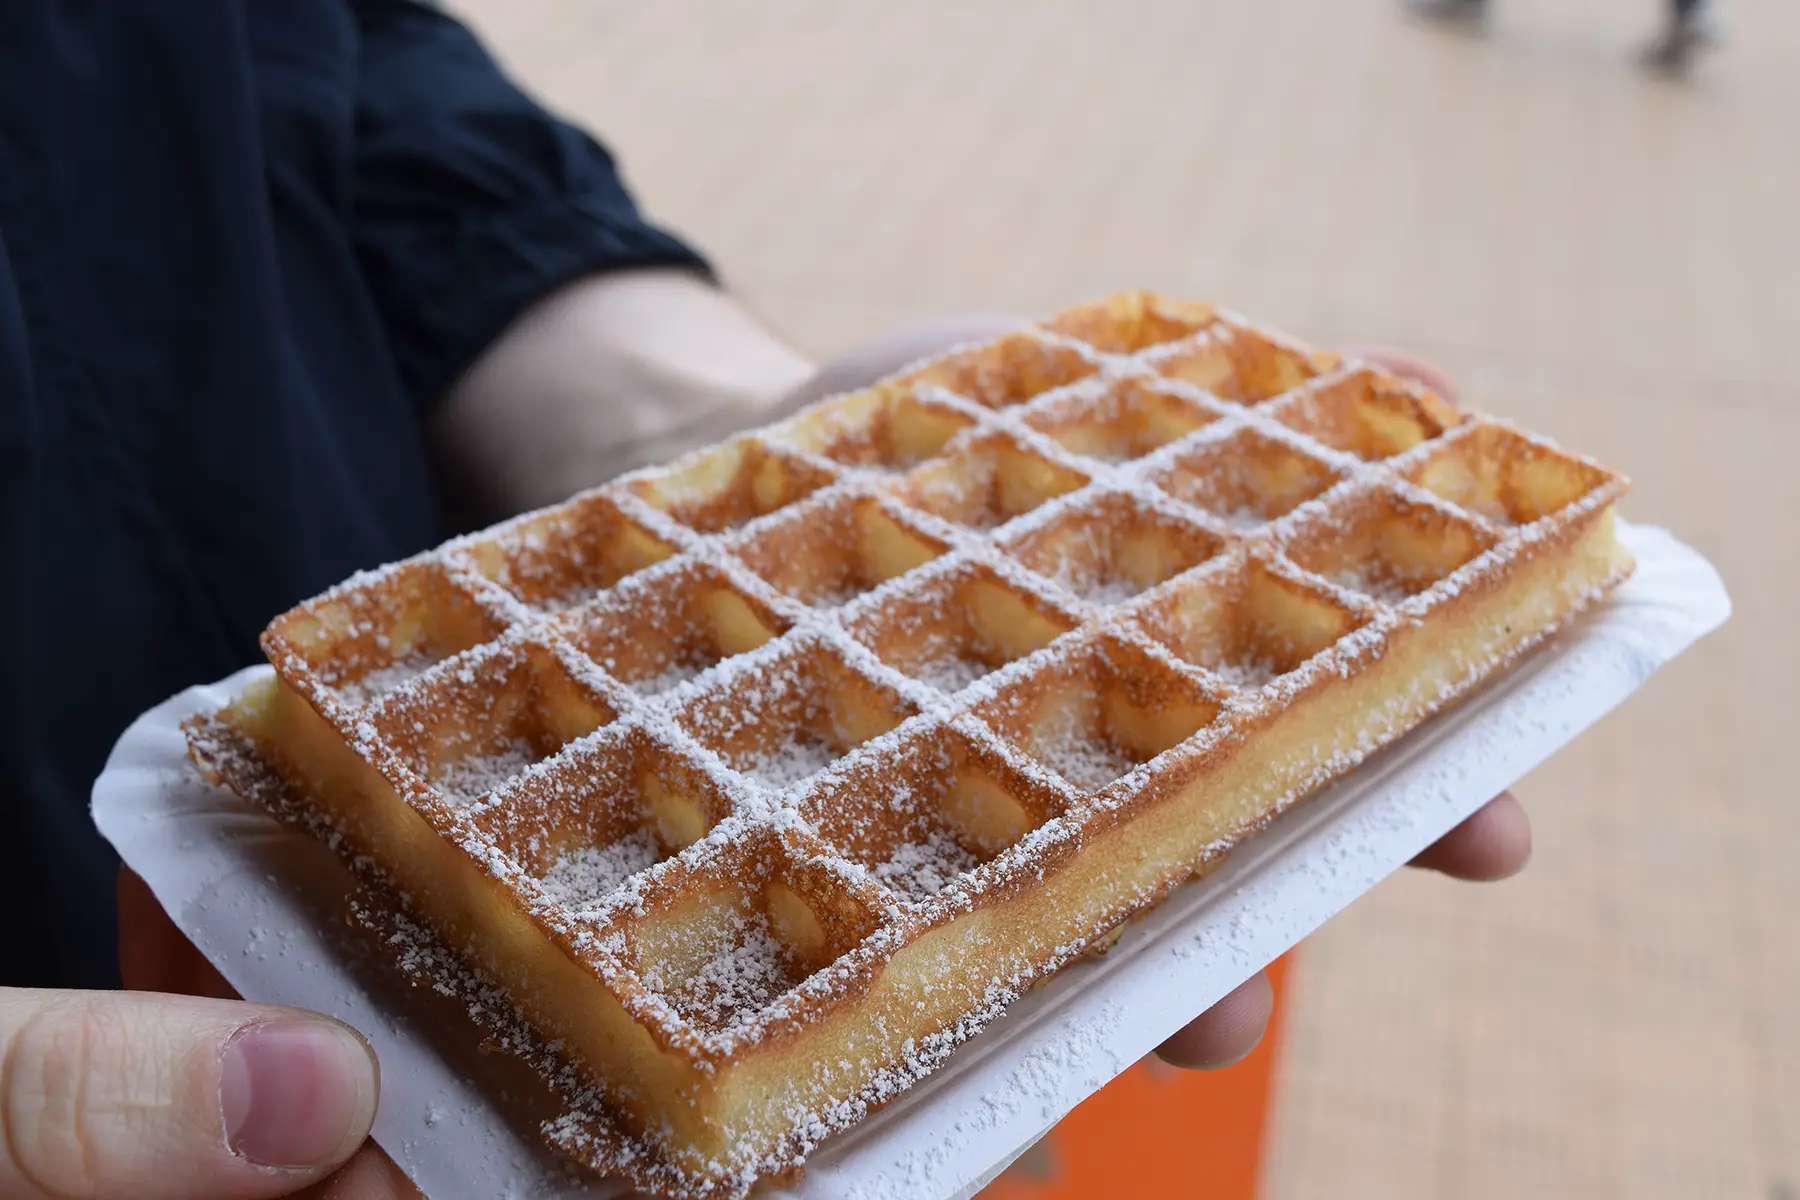 Belgian waffle covered in powdered sugar